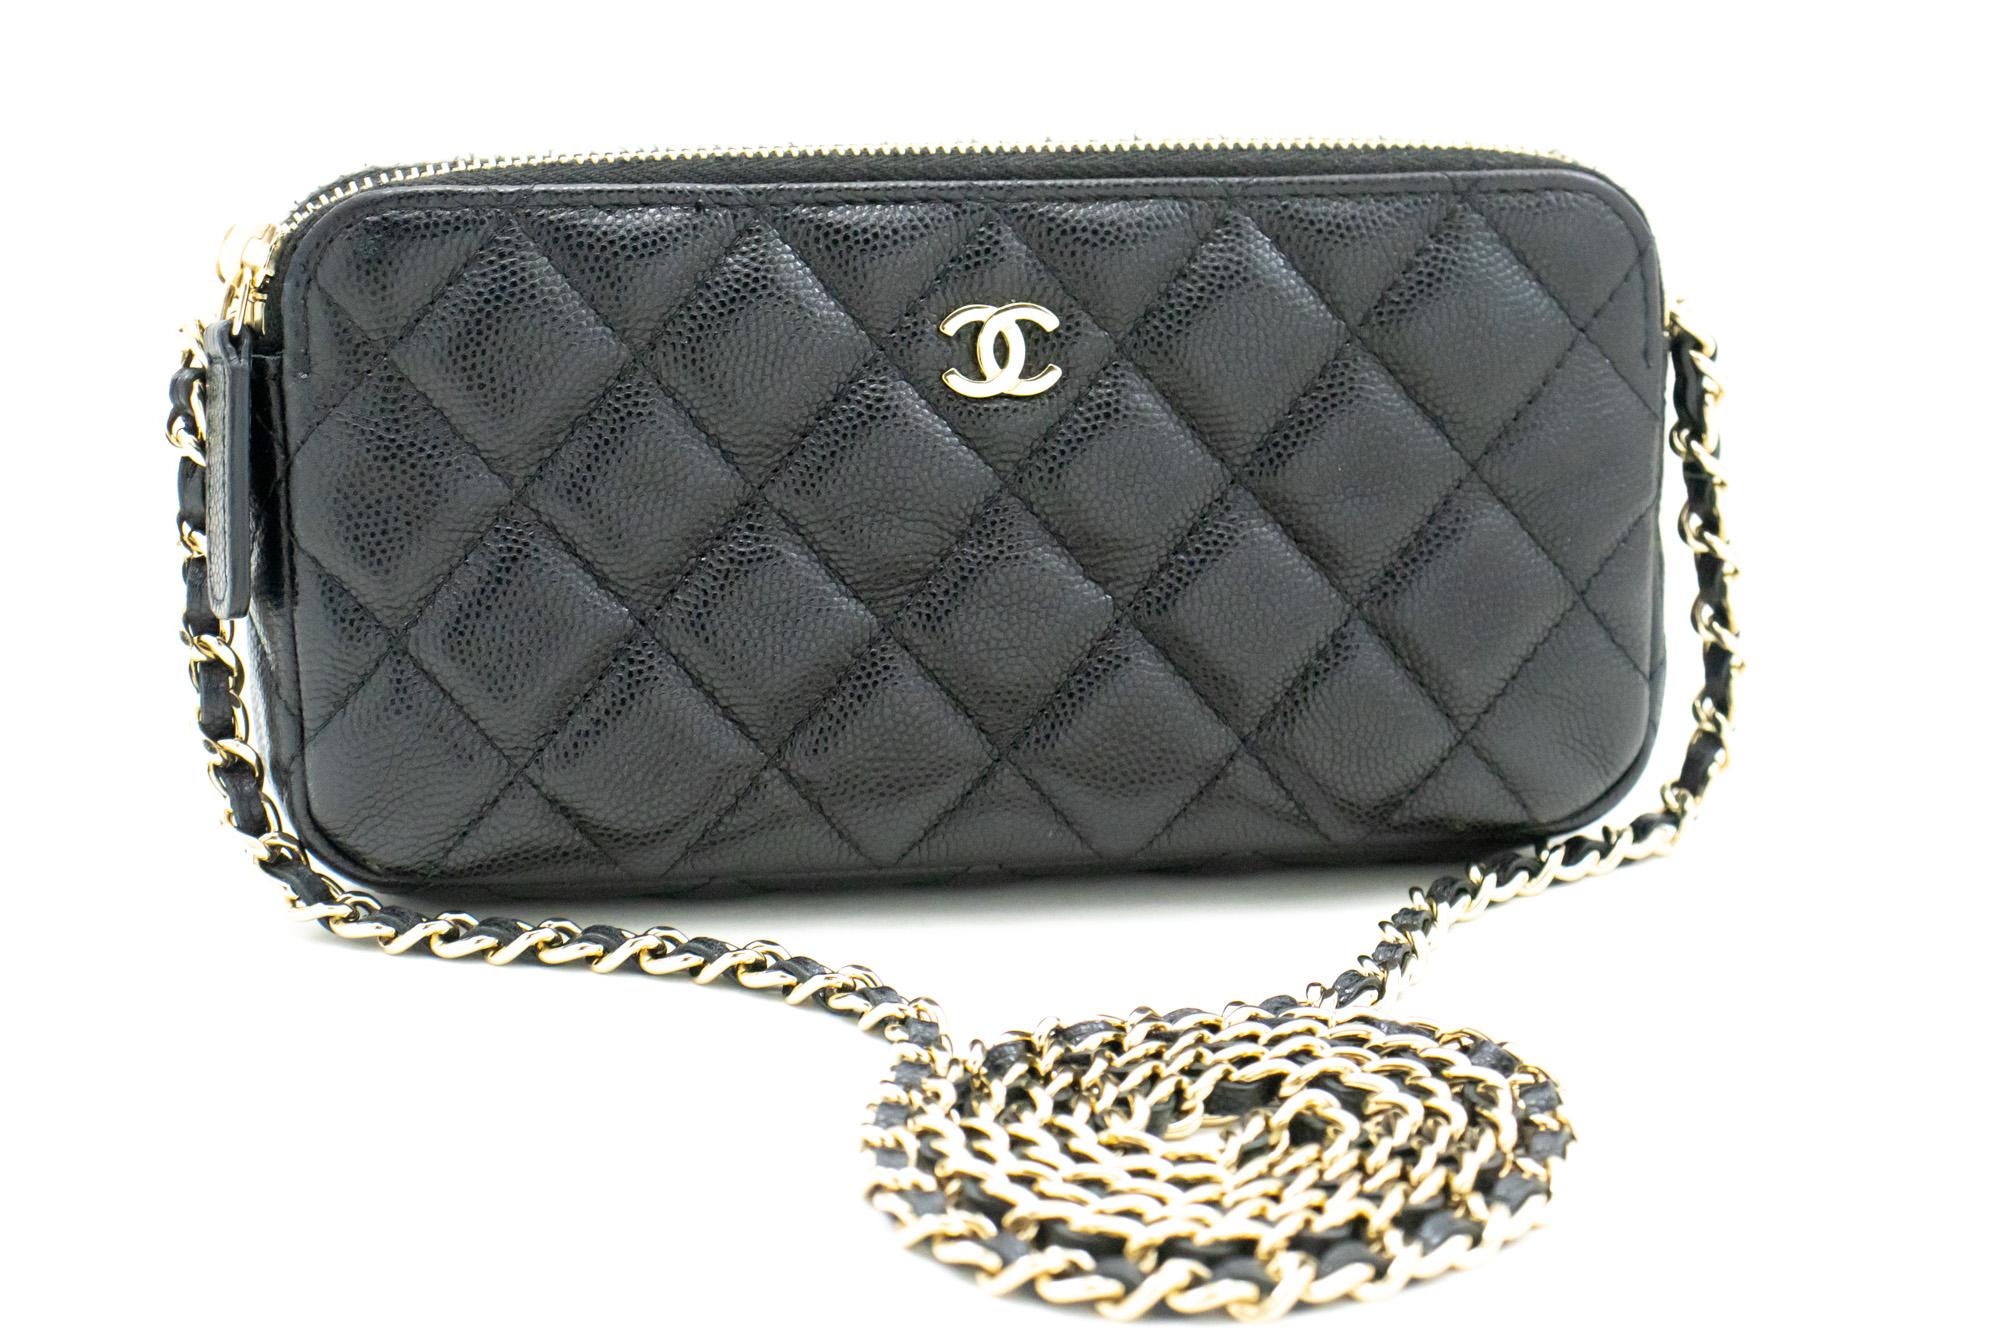 An authentic CHANEL Caviar Wallet On Chain WOC Double Zip Chain Shoulder Bag. The color is Black. The outside material is Leather. The pattern is Solid. This item is Contemporary. The year of manufacture would be 2020.
Conditions & Ratings
Outside